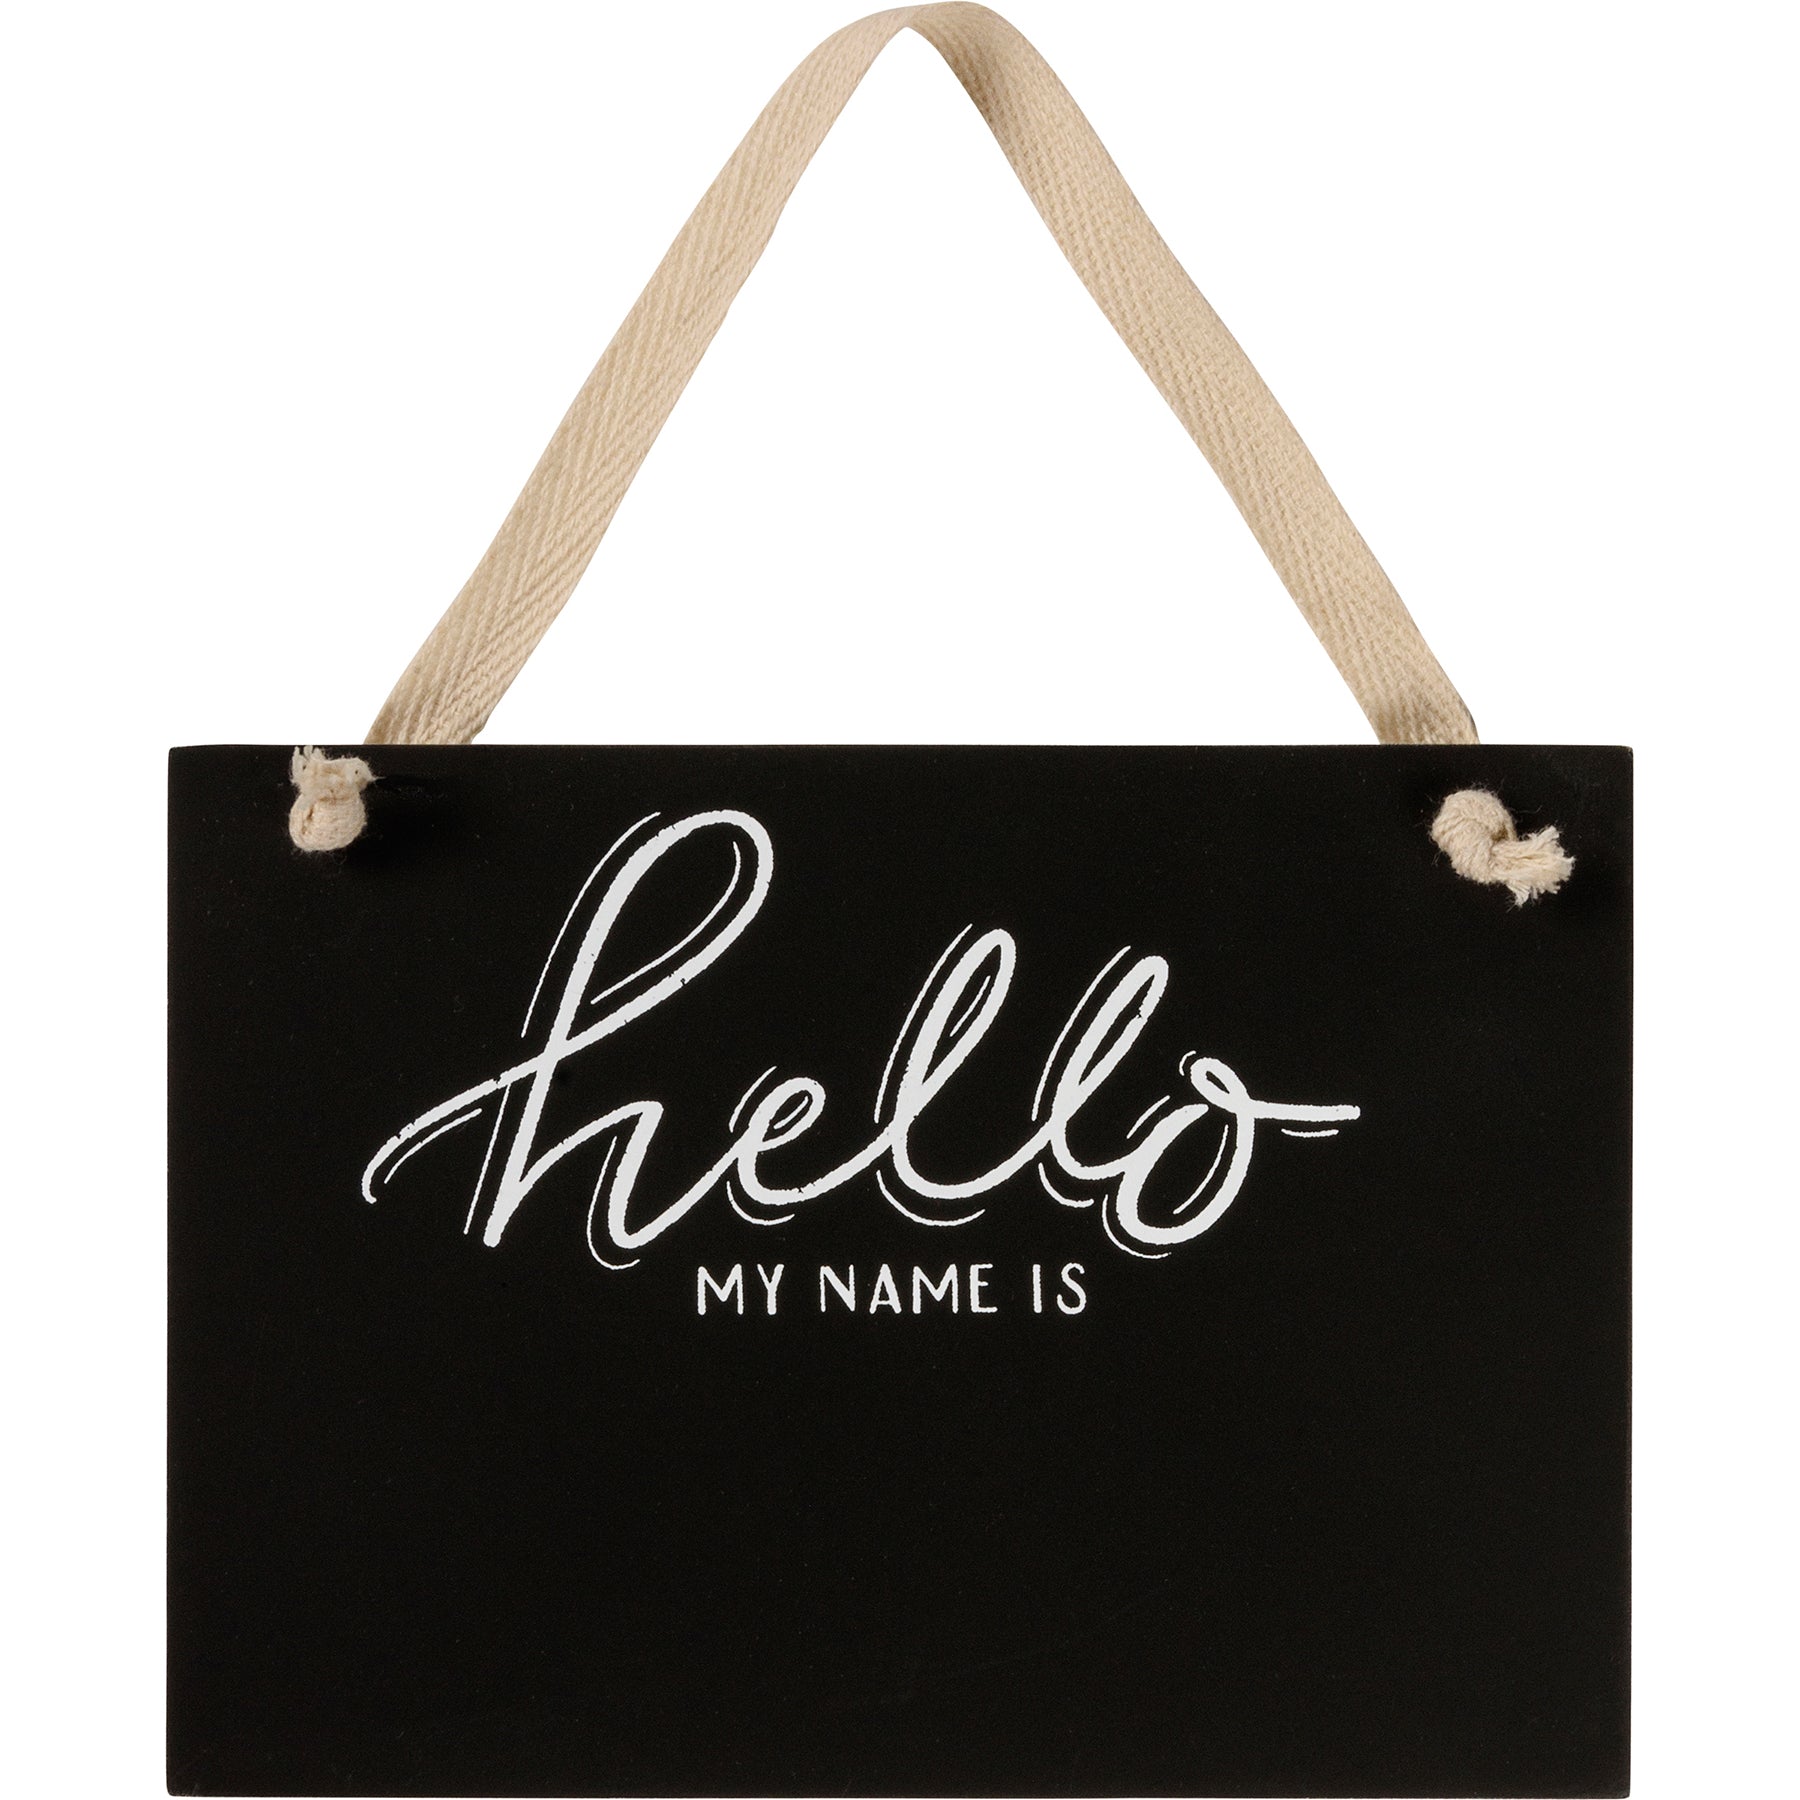 New Puppy - Hello My Name Is Hanging Sign